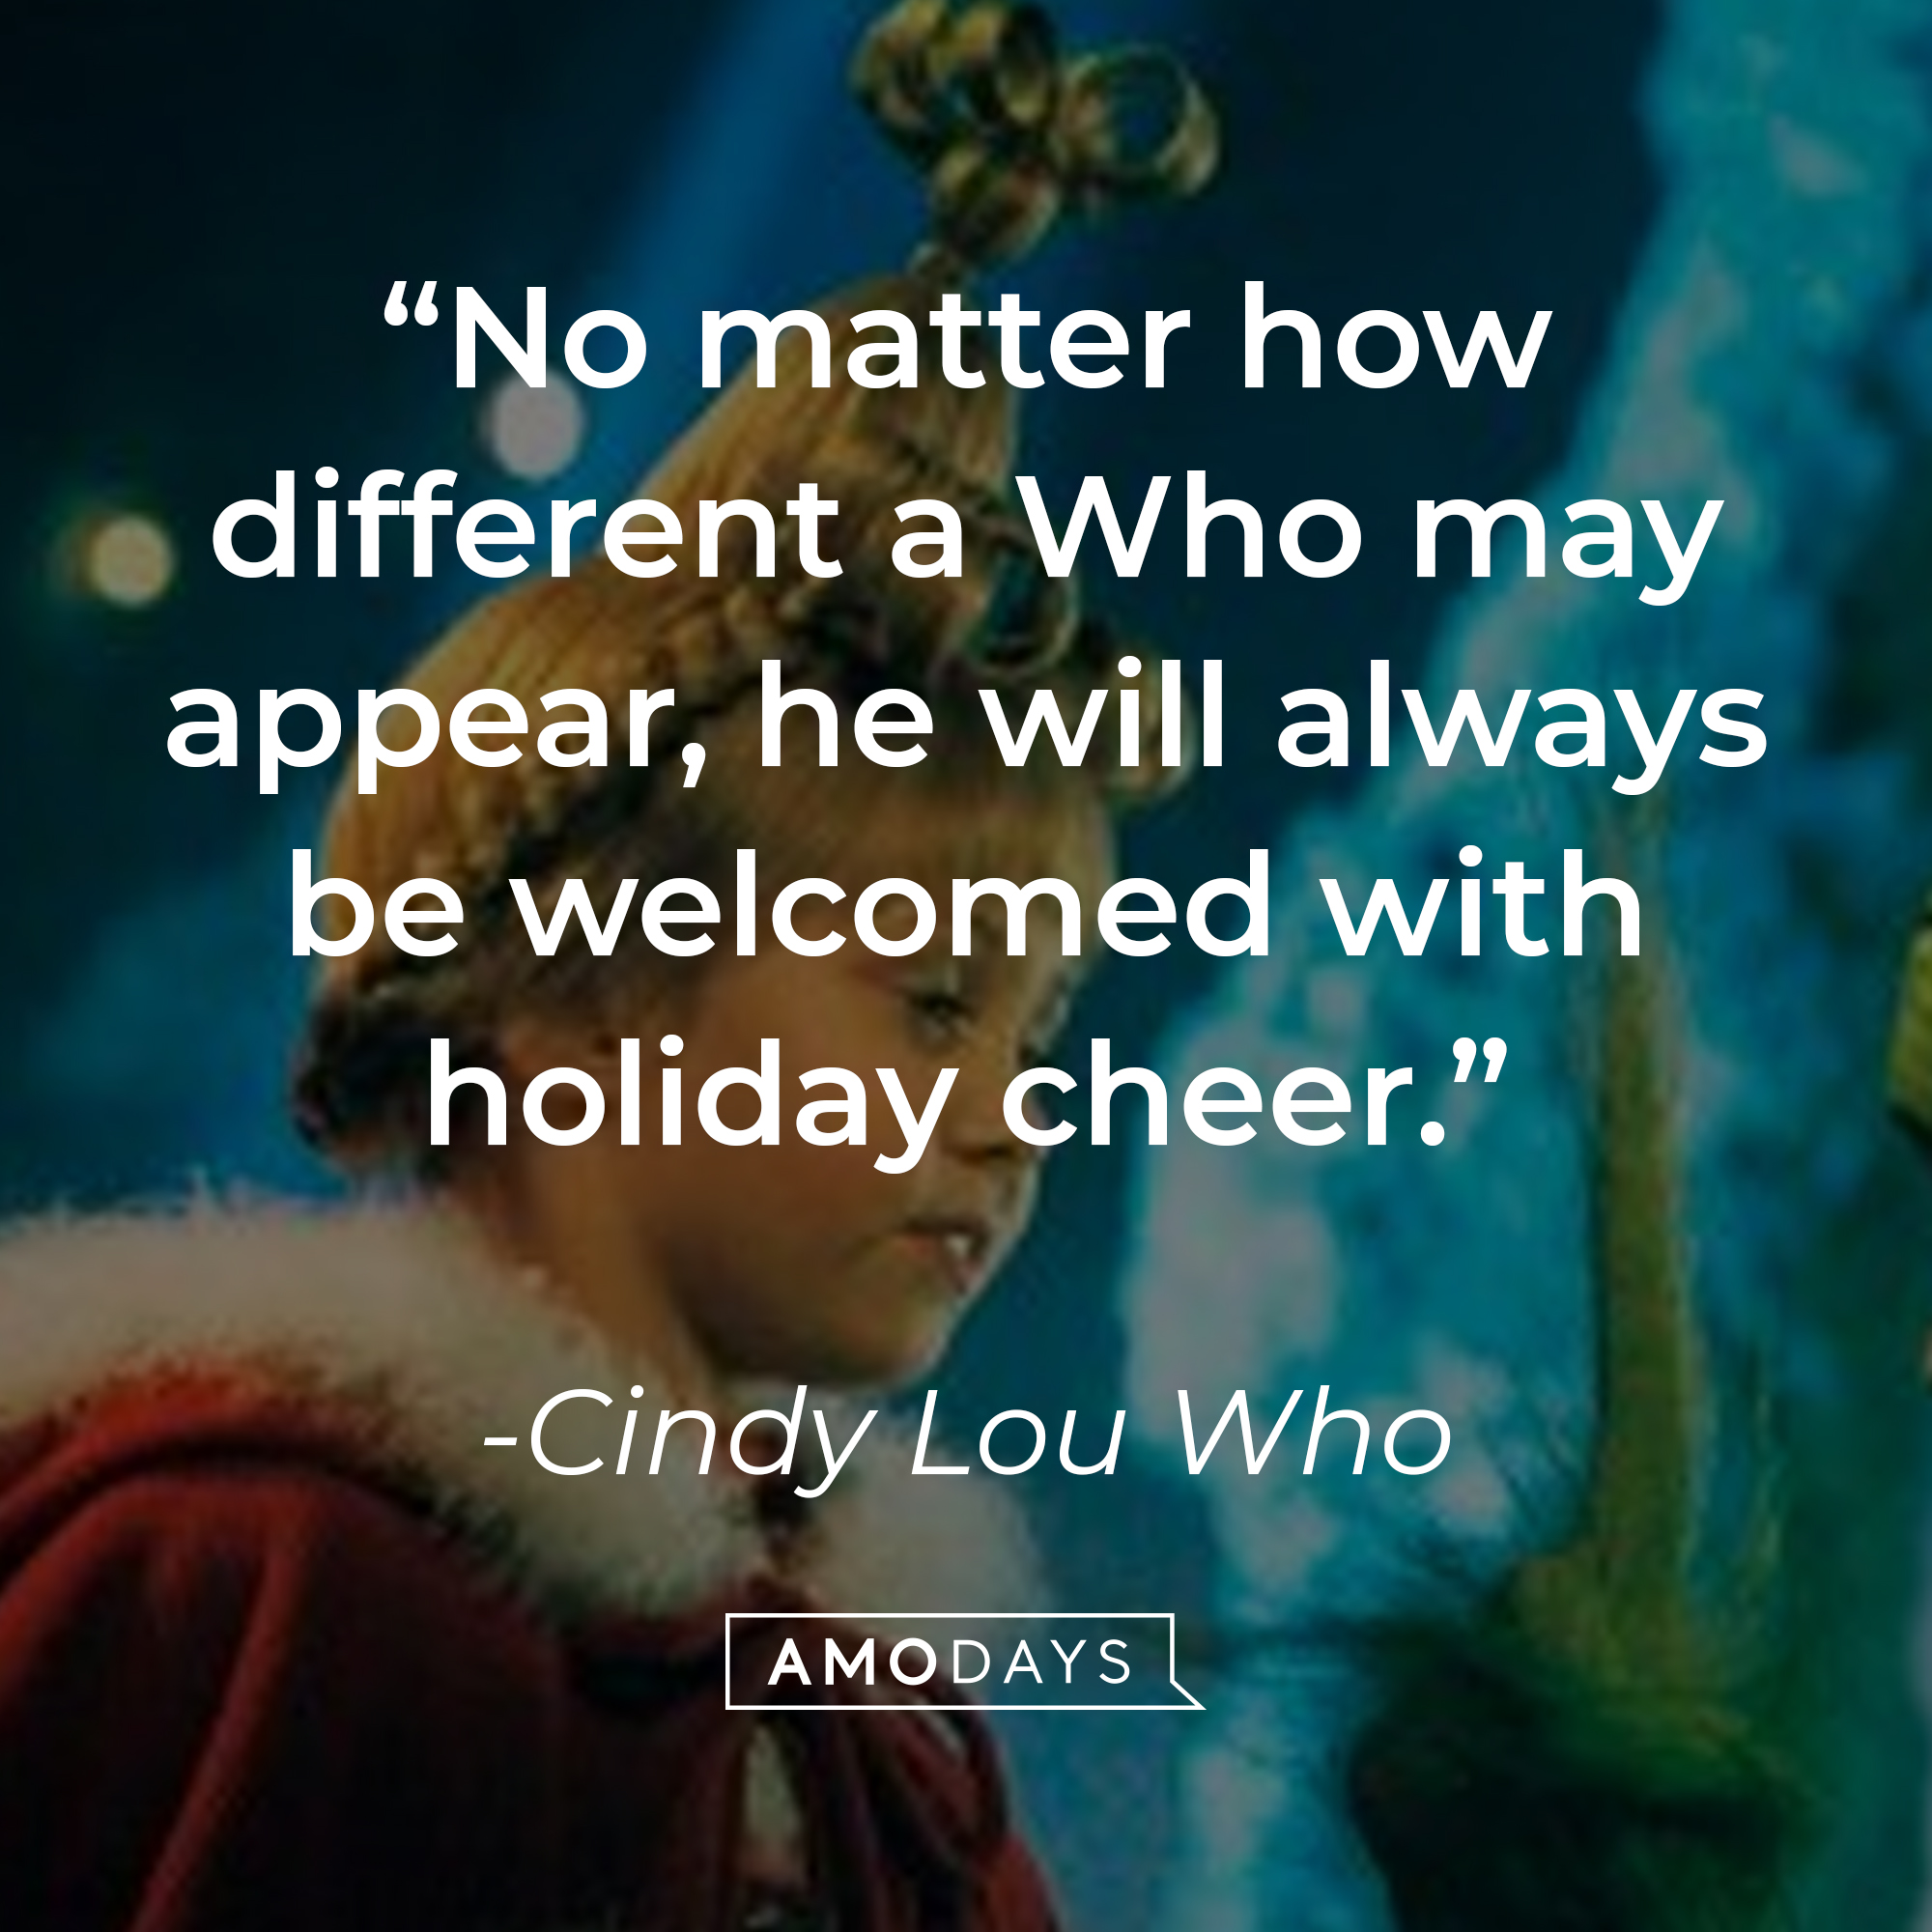 Cindy Lou Who, with her quote: "No matter how different a Who may appear, he will always be welcomed with holiday cheer." | Source: Youtube.com/UniversalPictures